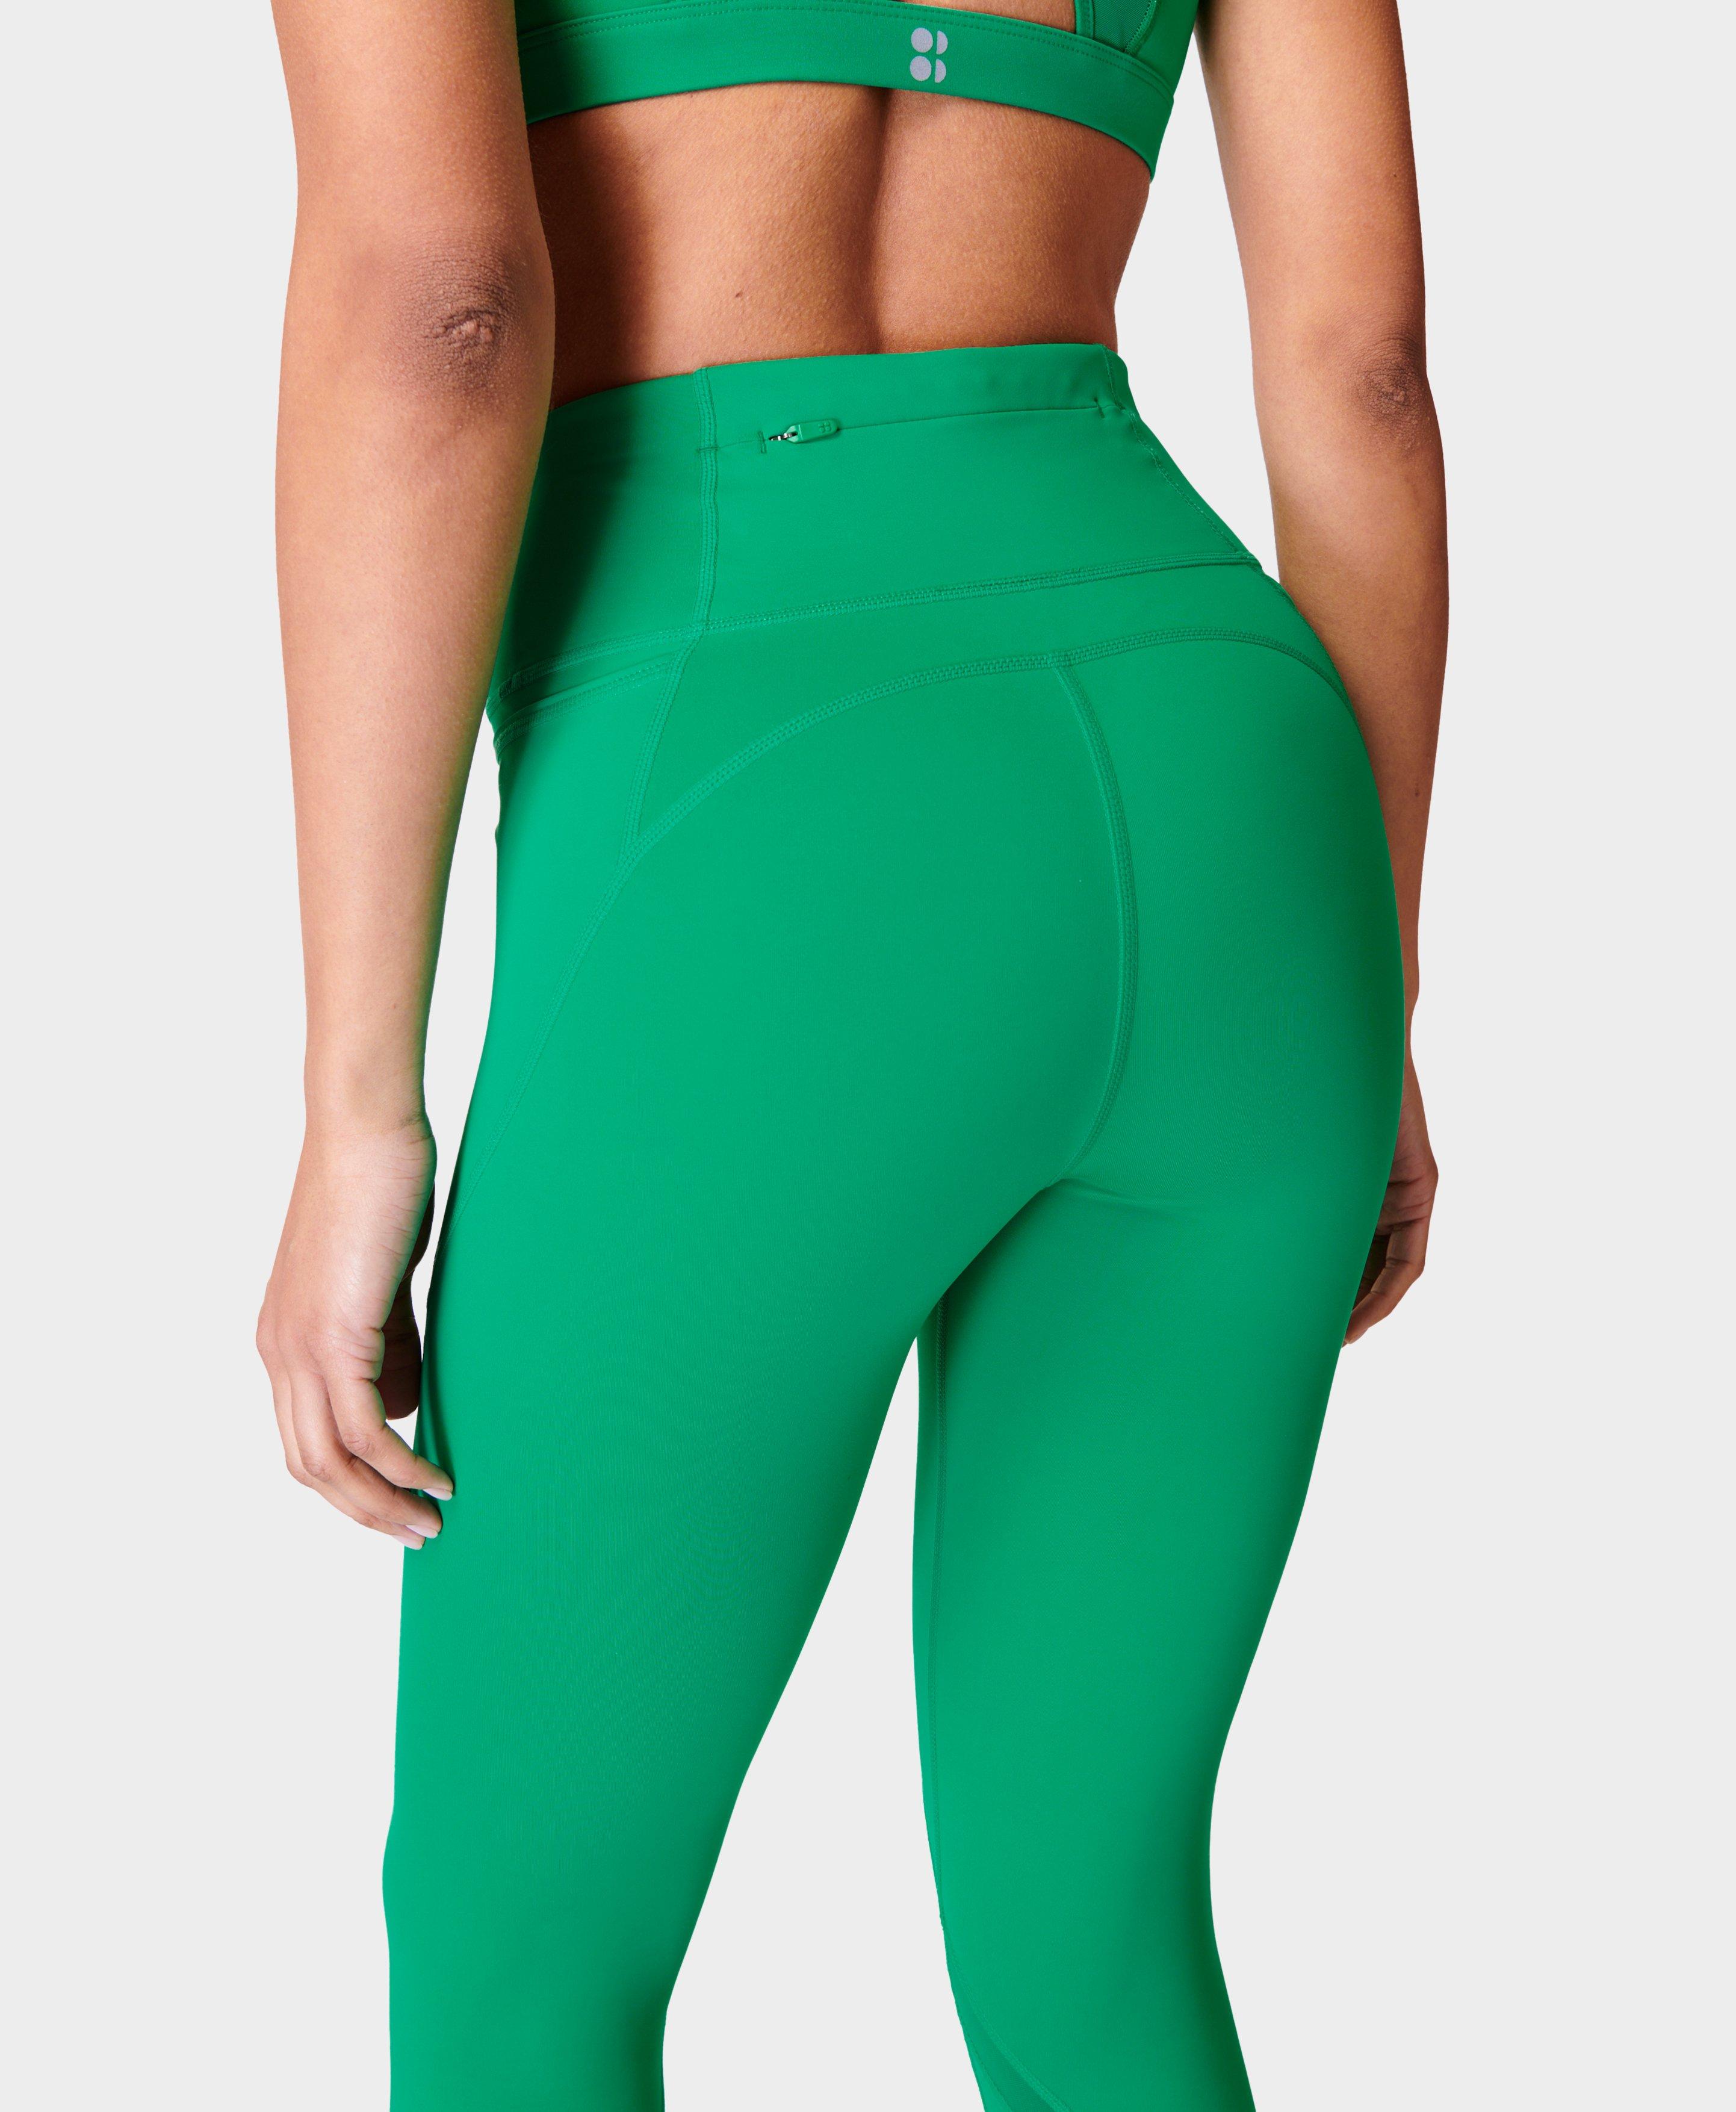 Sweaty Betty has 30% off and their best selling power leggings are on sale